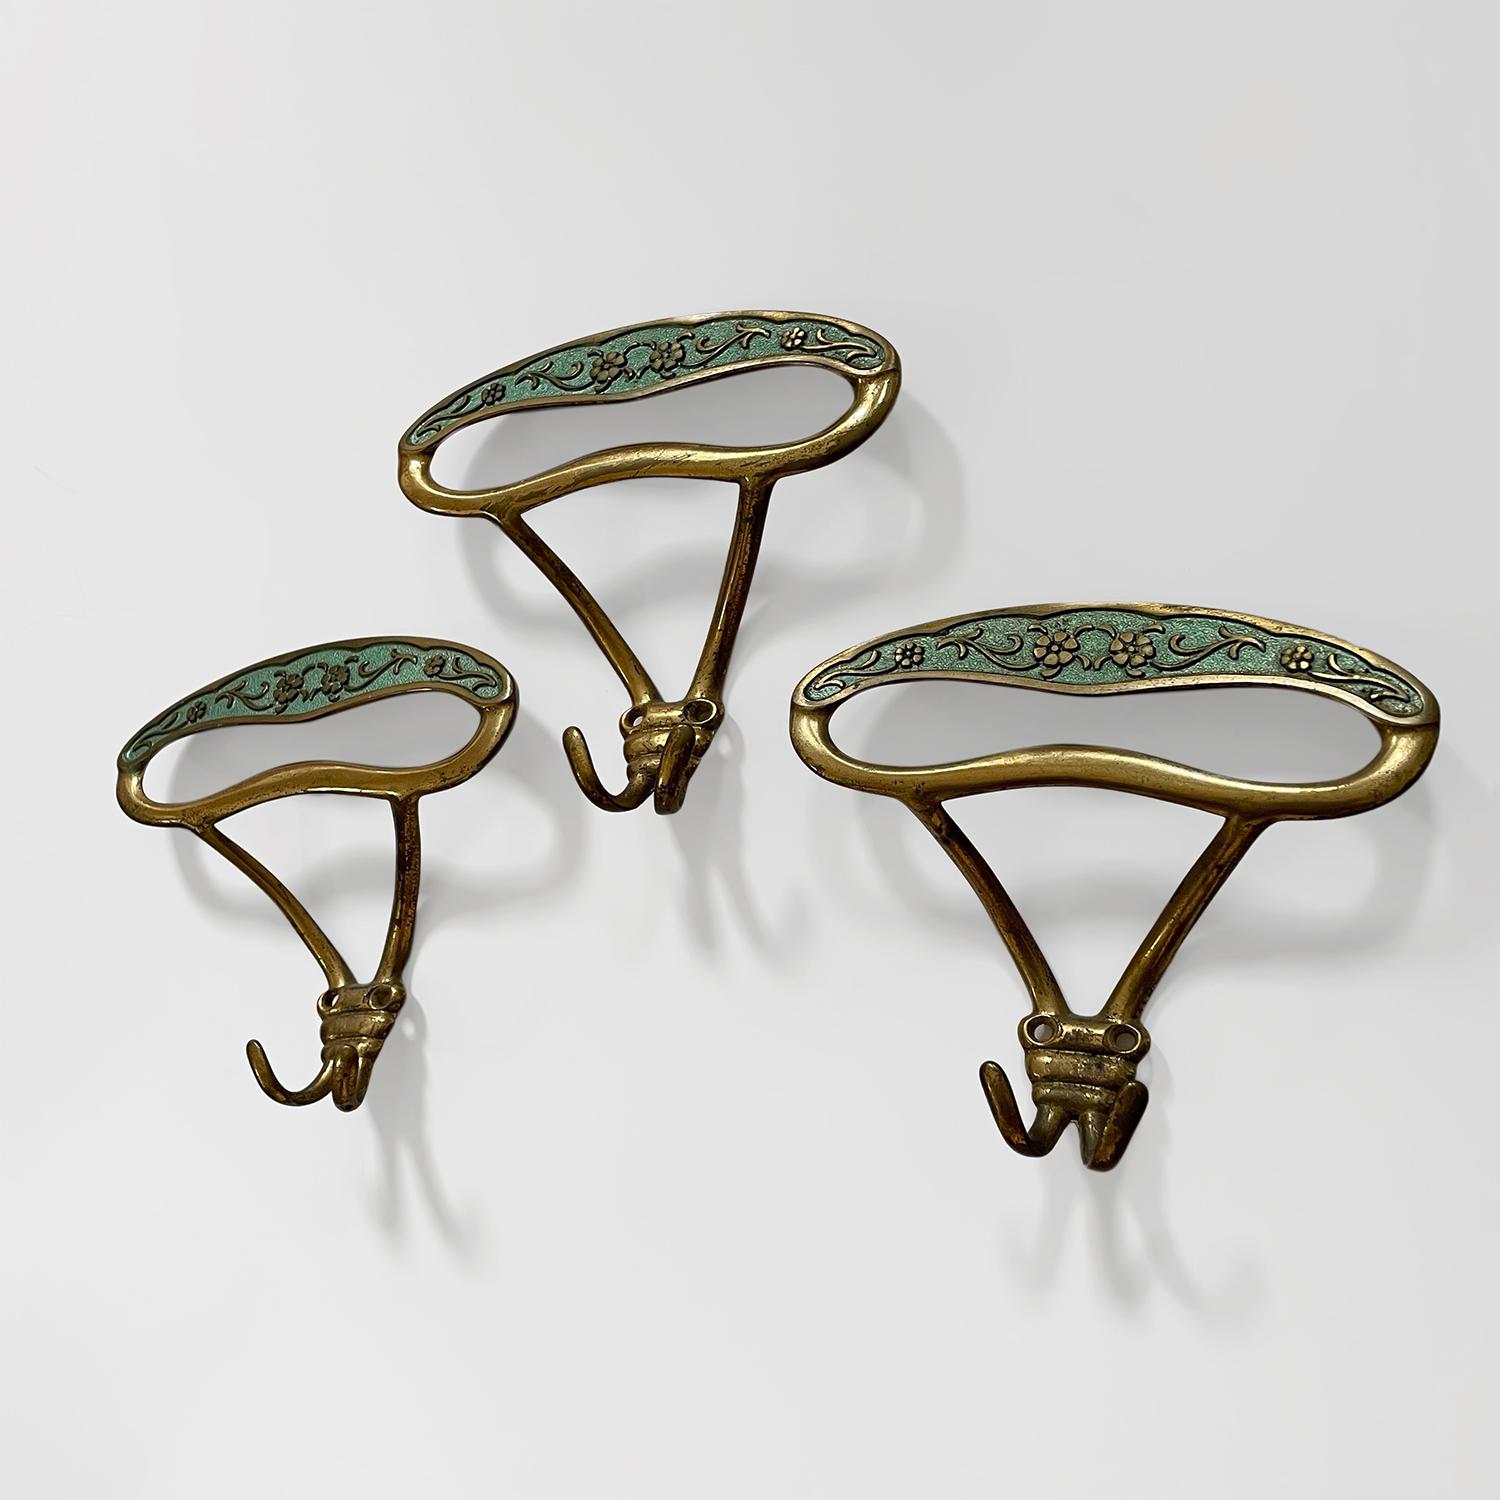 Italian floral wall hooks
Italy, circa 1950’s
Each hook provides plenty of storage with an upper arched wide panel hook and a double lower split hook
Embossed floral detailing is beautifully contrasted with a rich vibrant green backdrop
Each wall